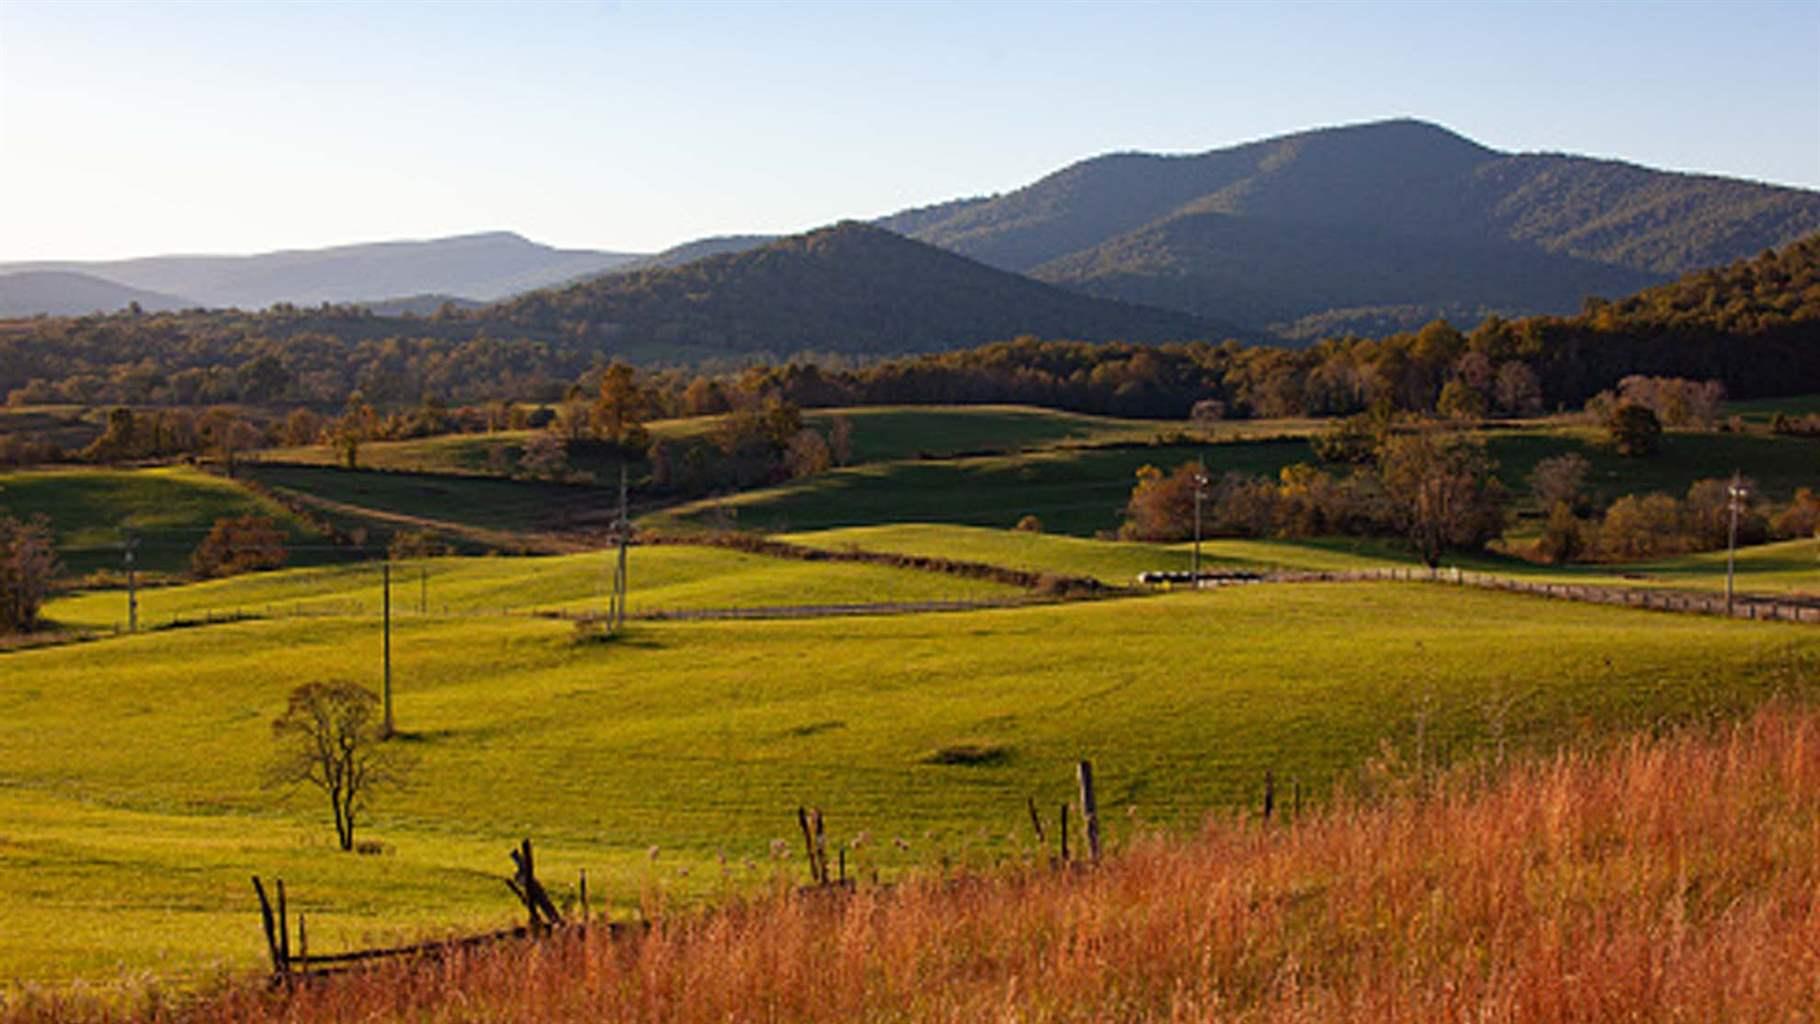 Landscape of rural Virginia with mountains in the background and hilly grass in the foreground